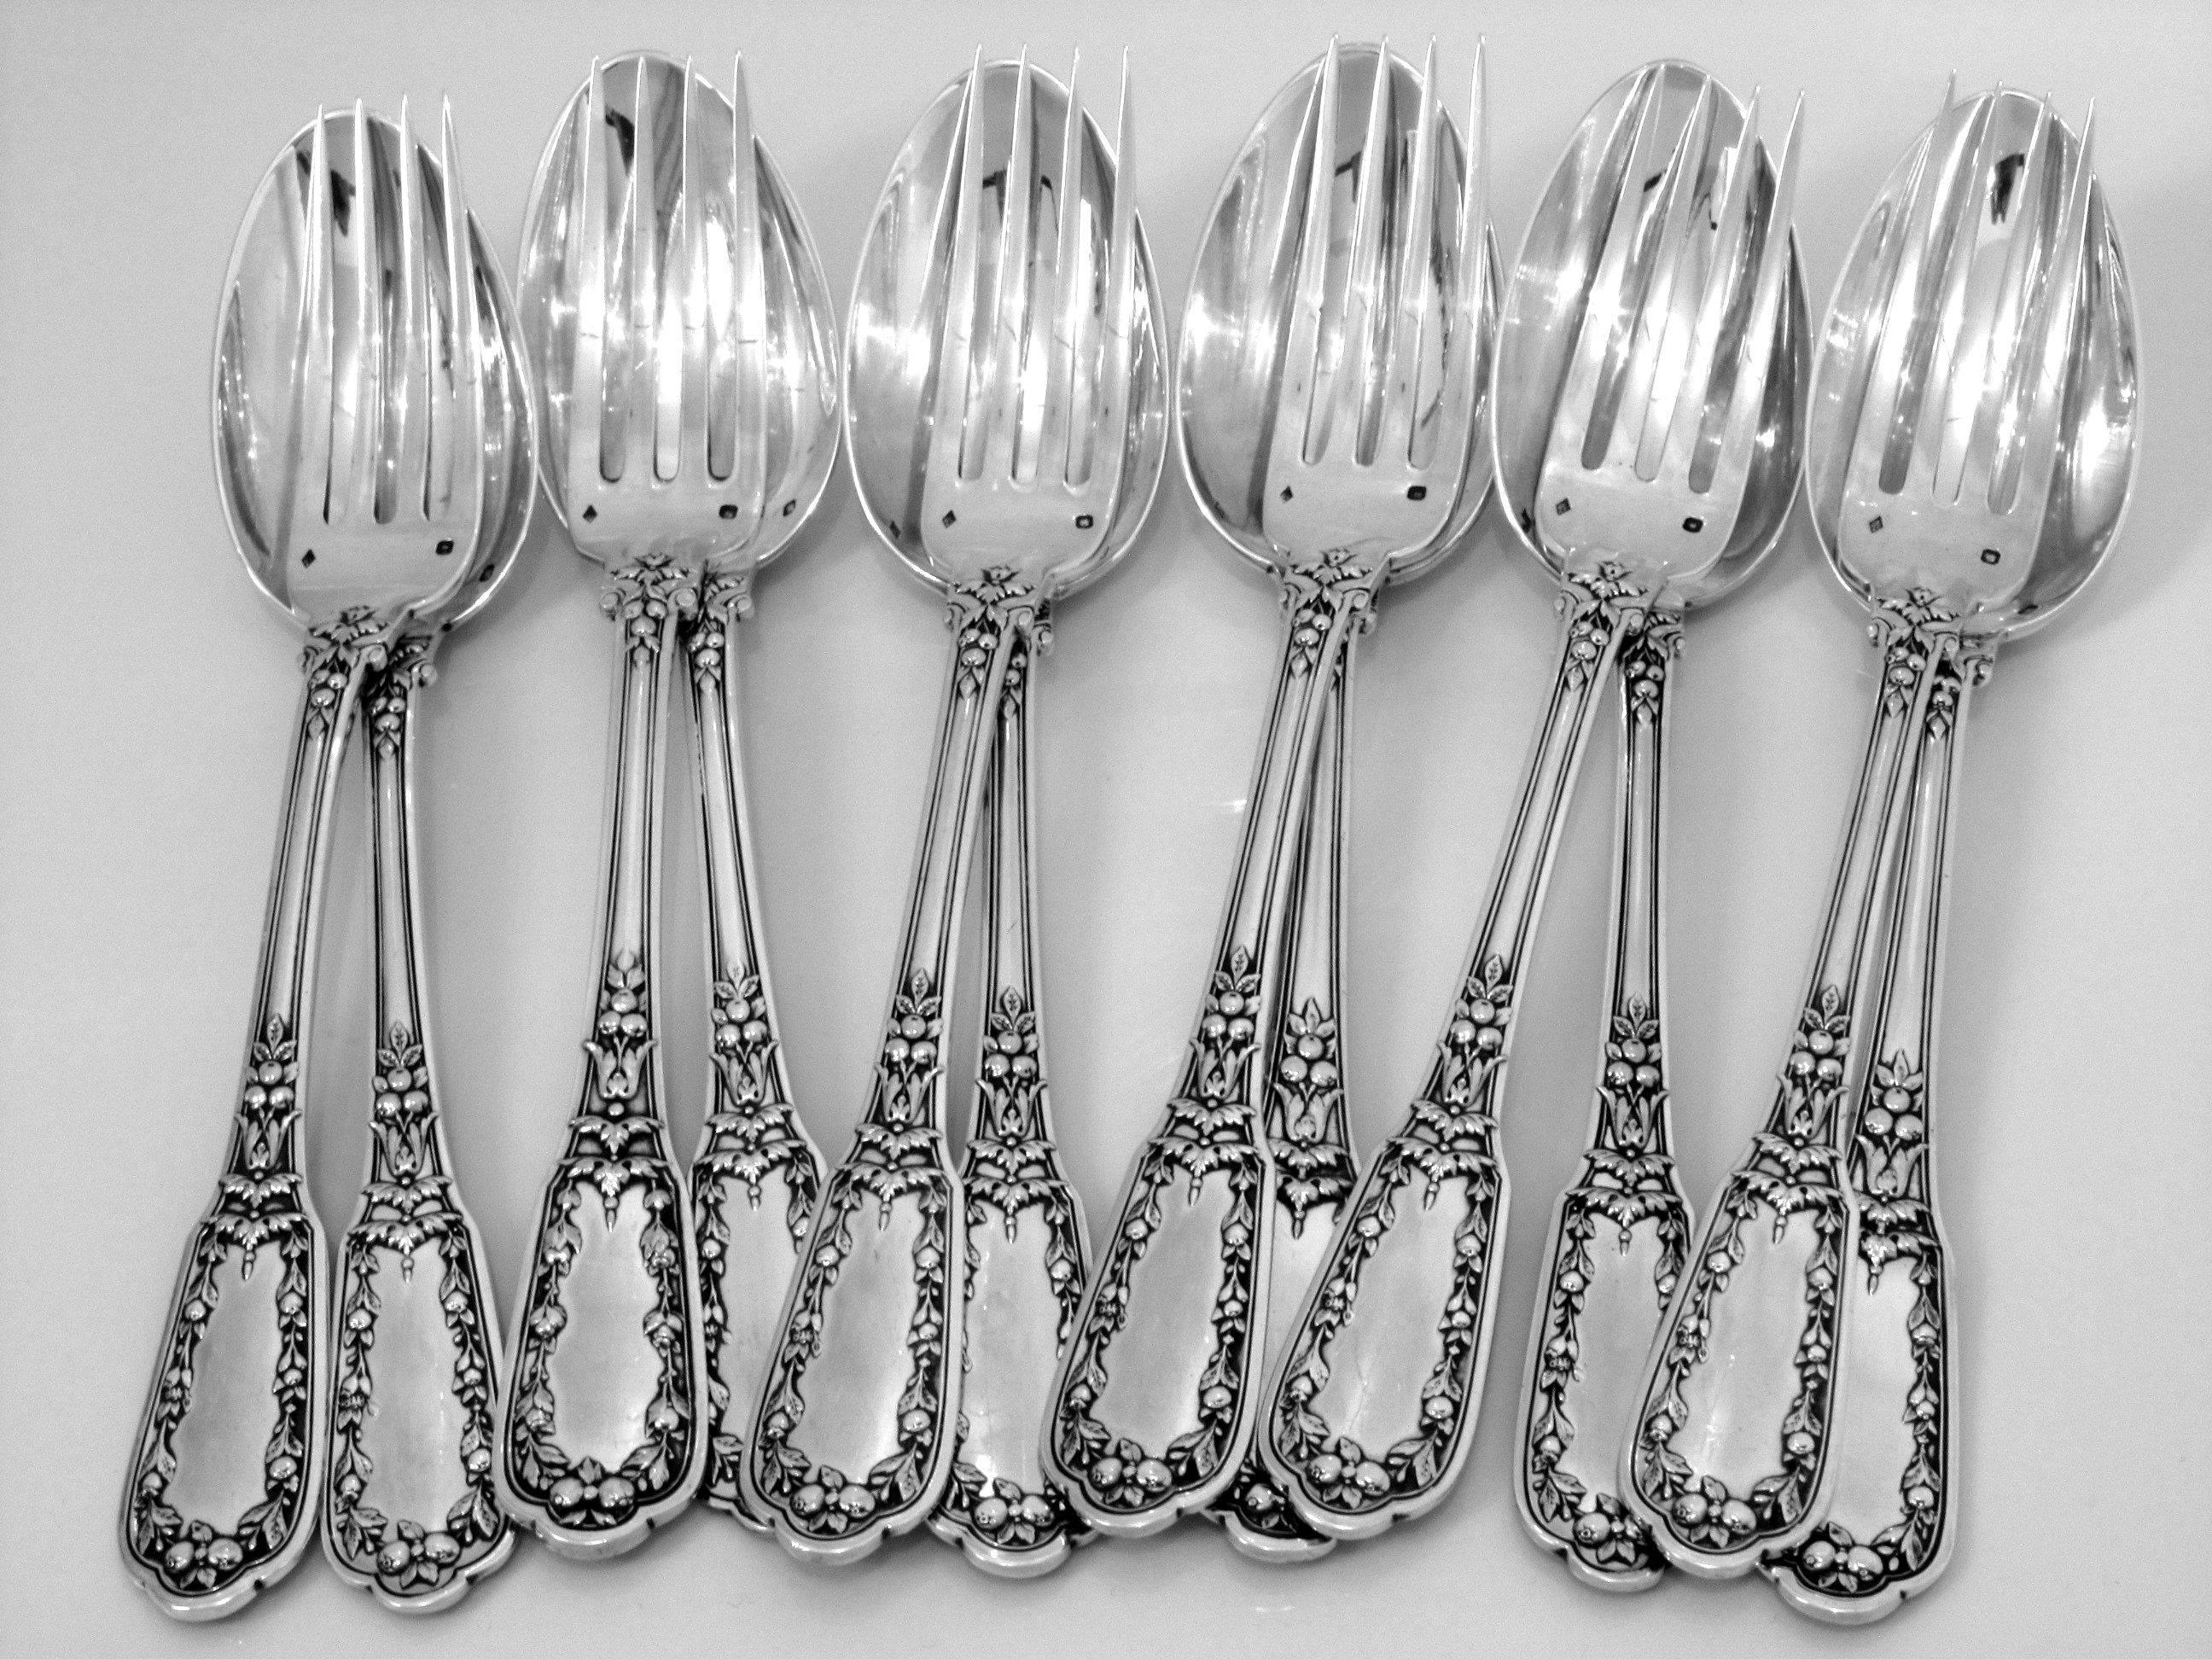 Soufflot Gorgeous French Sterling Silver Dinner Flatware Set 12 pc Mascarons For Sale 1